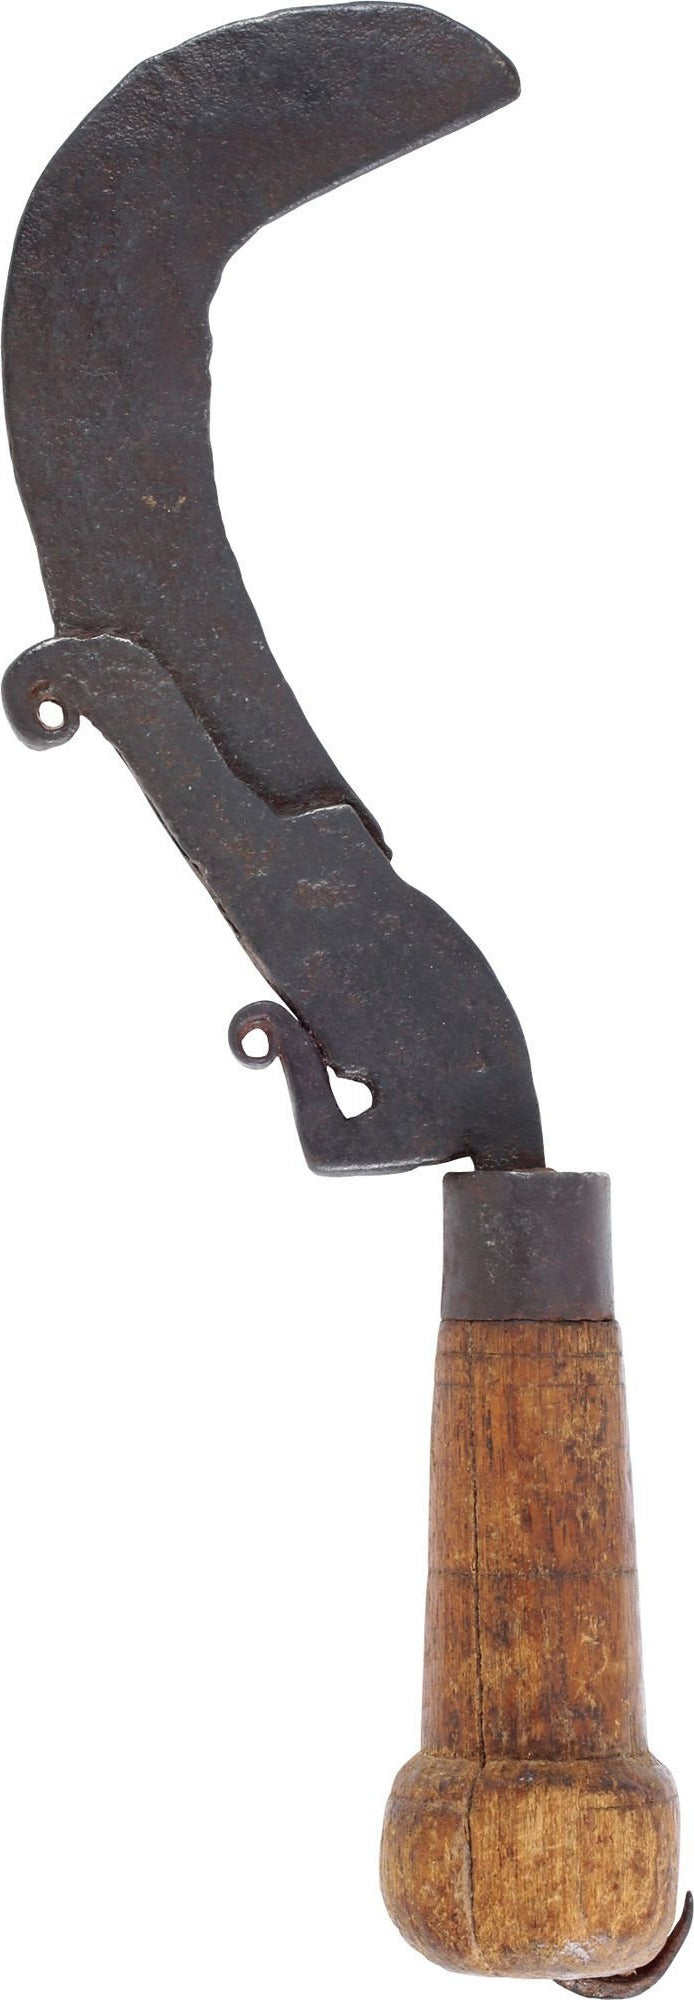 SOUTH INDIAN HOOK KNIFE C.1800 - WAS $185.00, NOW $138.75 - Fagan Arms